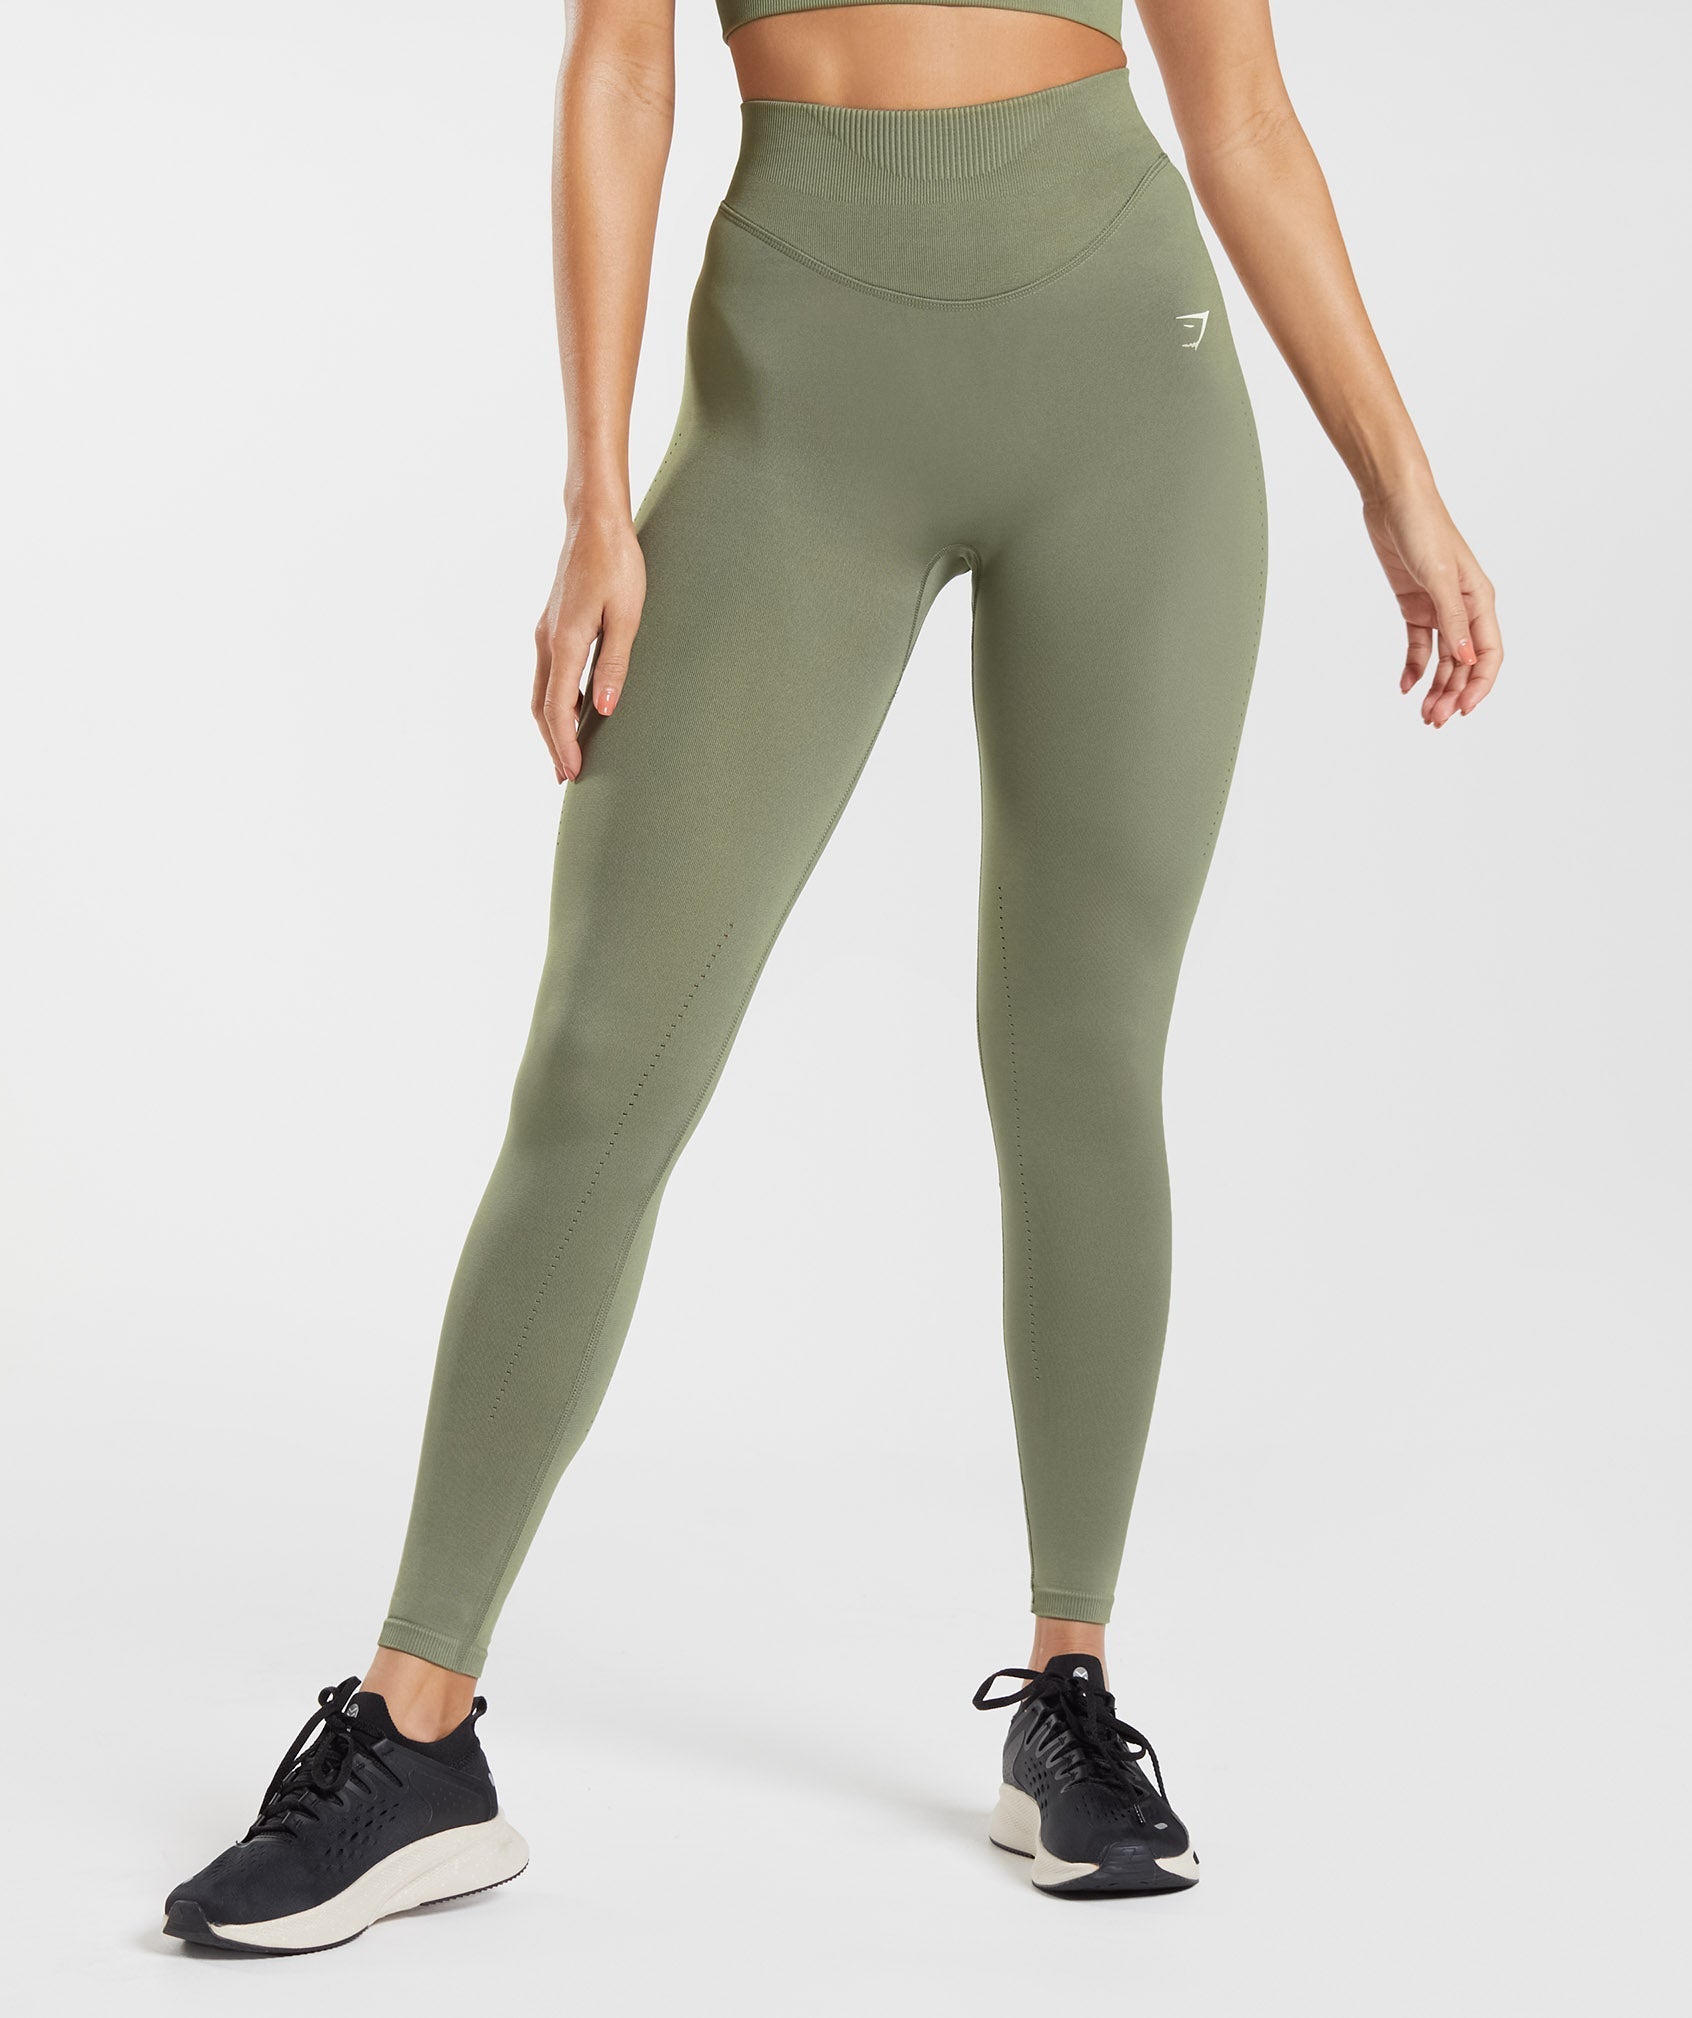 High Waisted Yoga Black Seamless Leggings For Women Non Transparent, Sexy  Buttocks, Perfect For Fitness And Sports Outfits From Wuxinin, $14.57